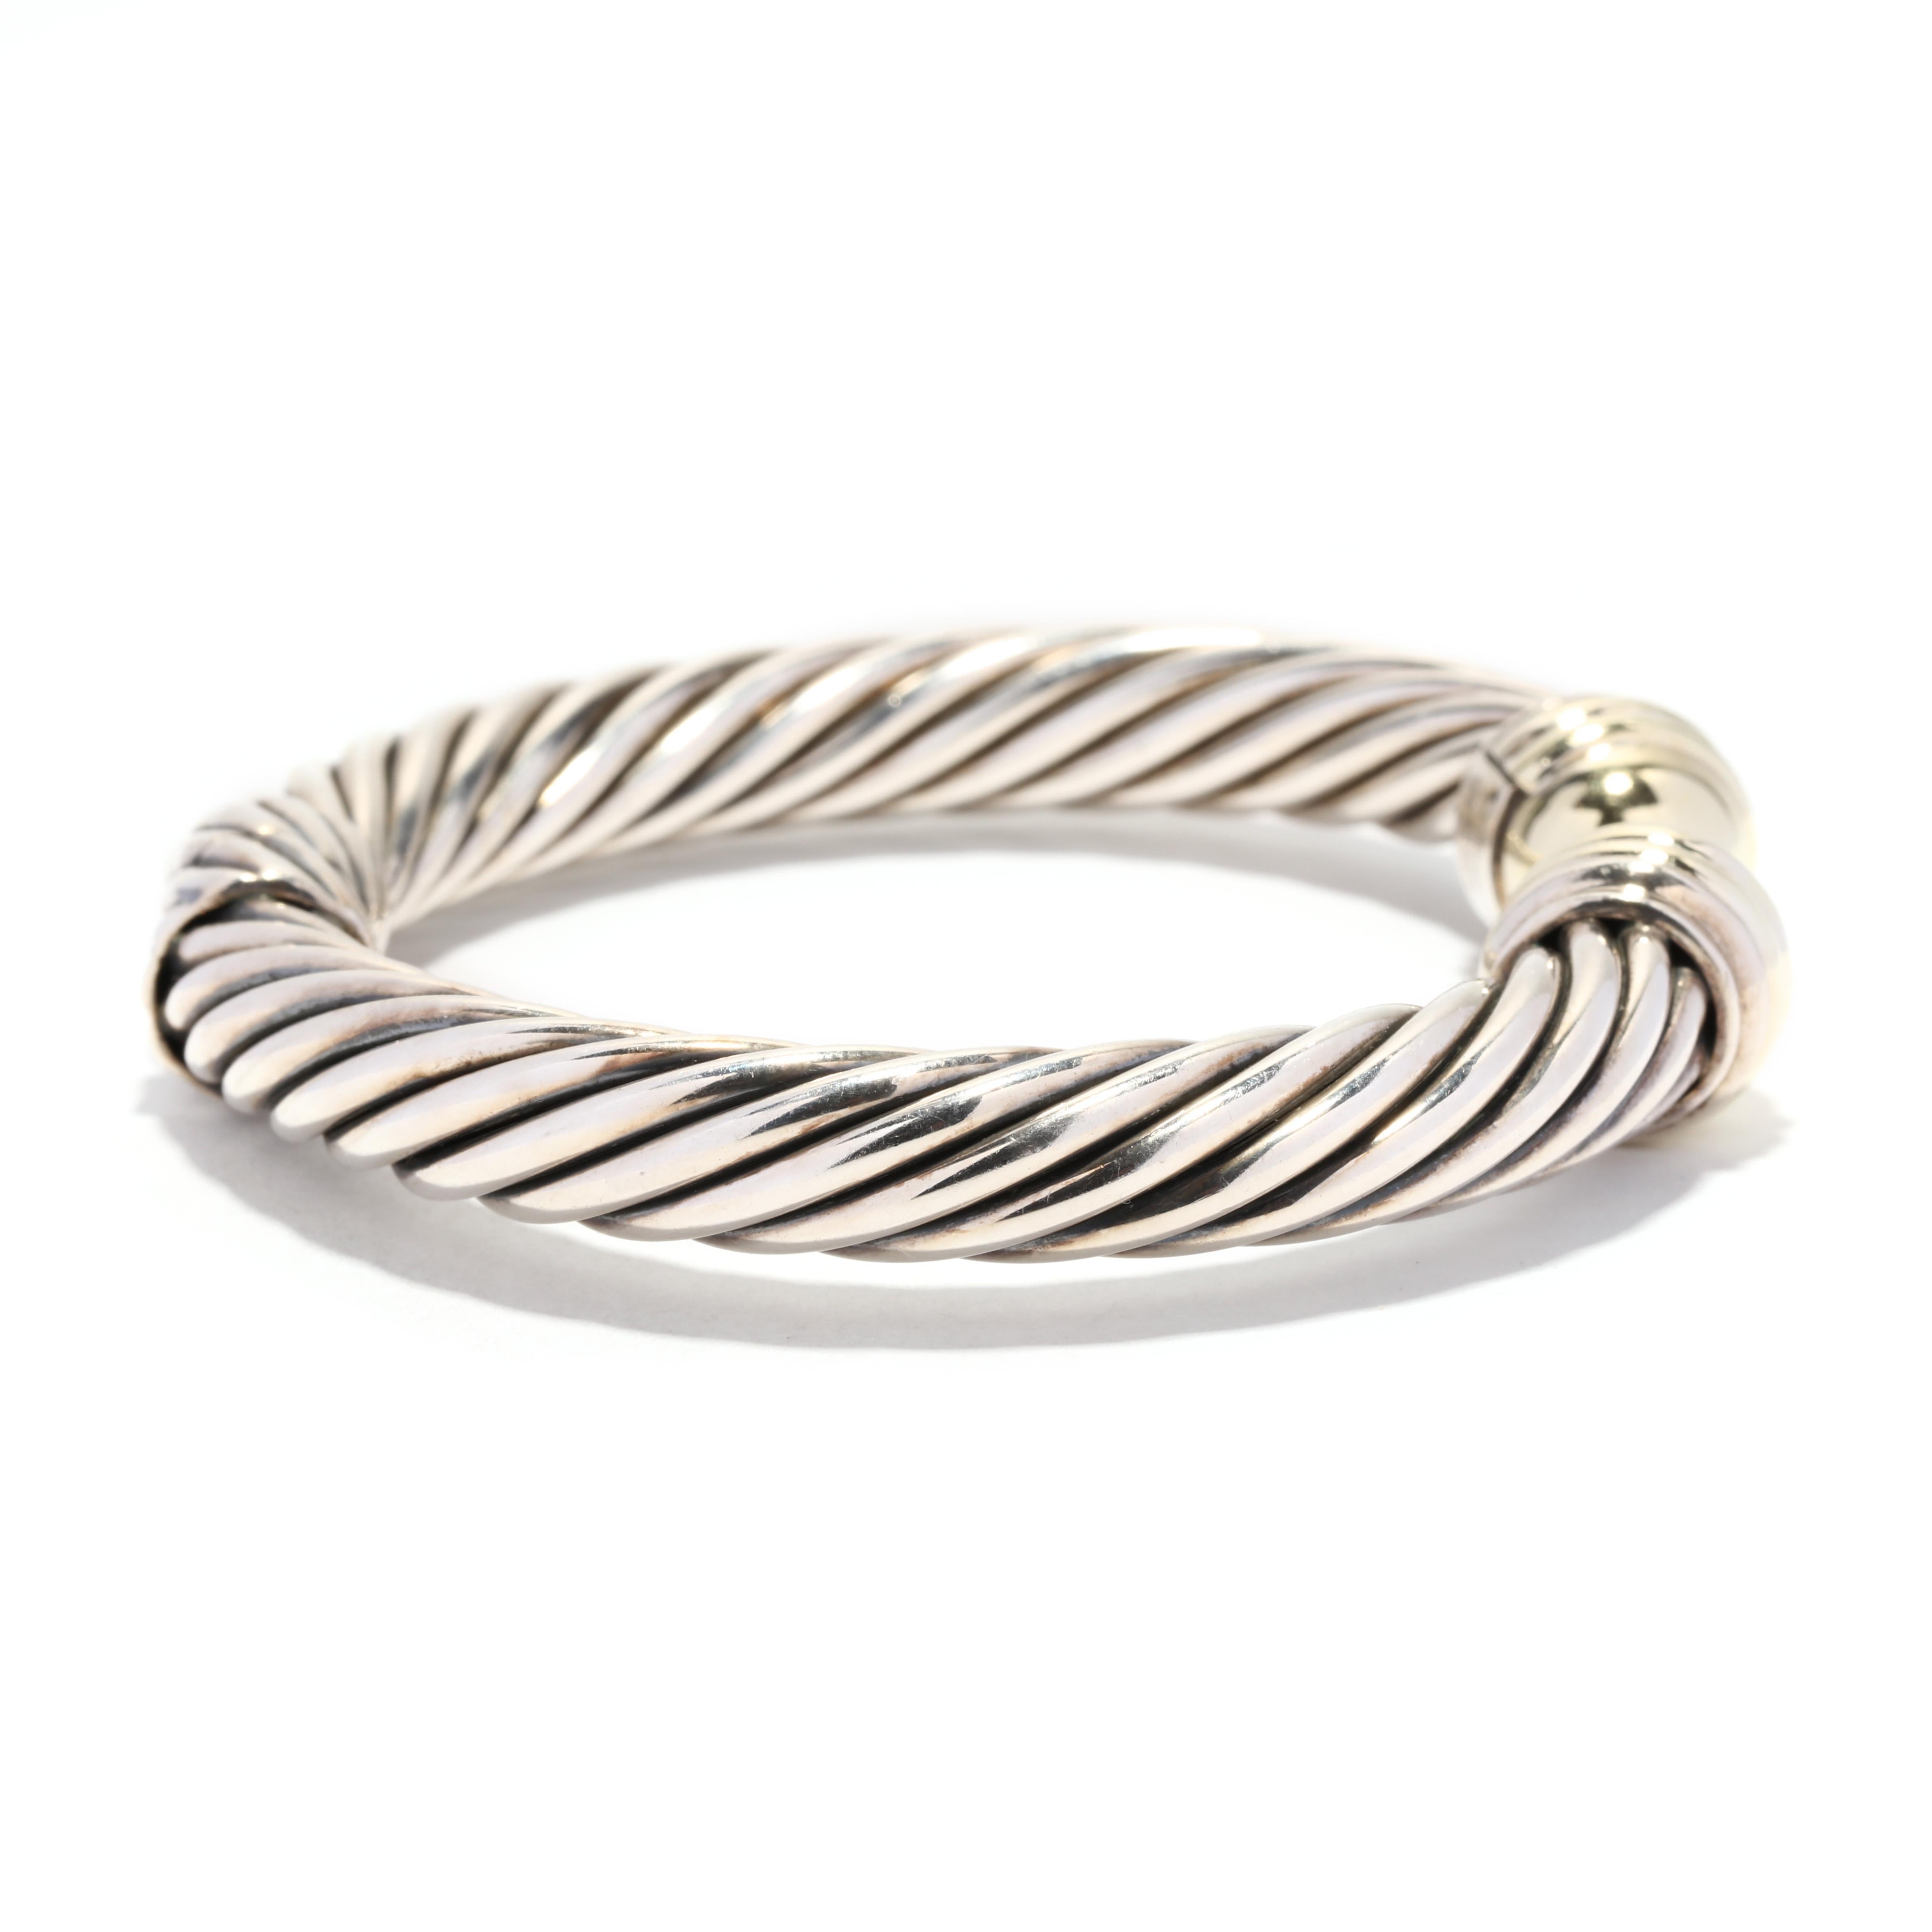 A vintage David Yurman 14 karat yellow gold and sterling silver large gold dome hinged cable cuff bracelet. This simple cuff bracelet features a hinged closure with silver cable motif cuffs and with yellow gold dome end caps. This is the David